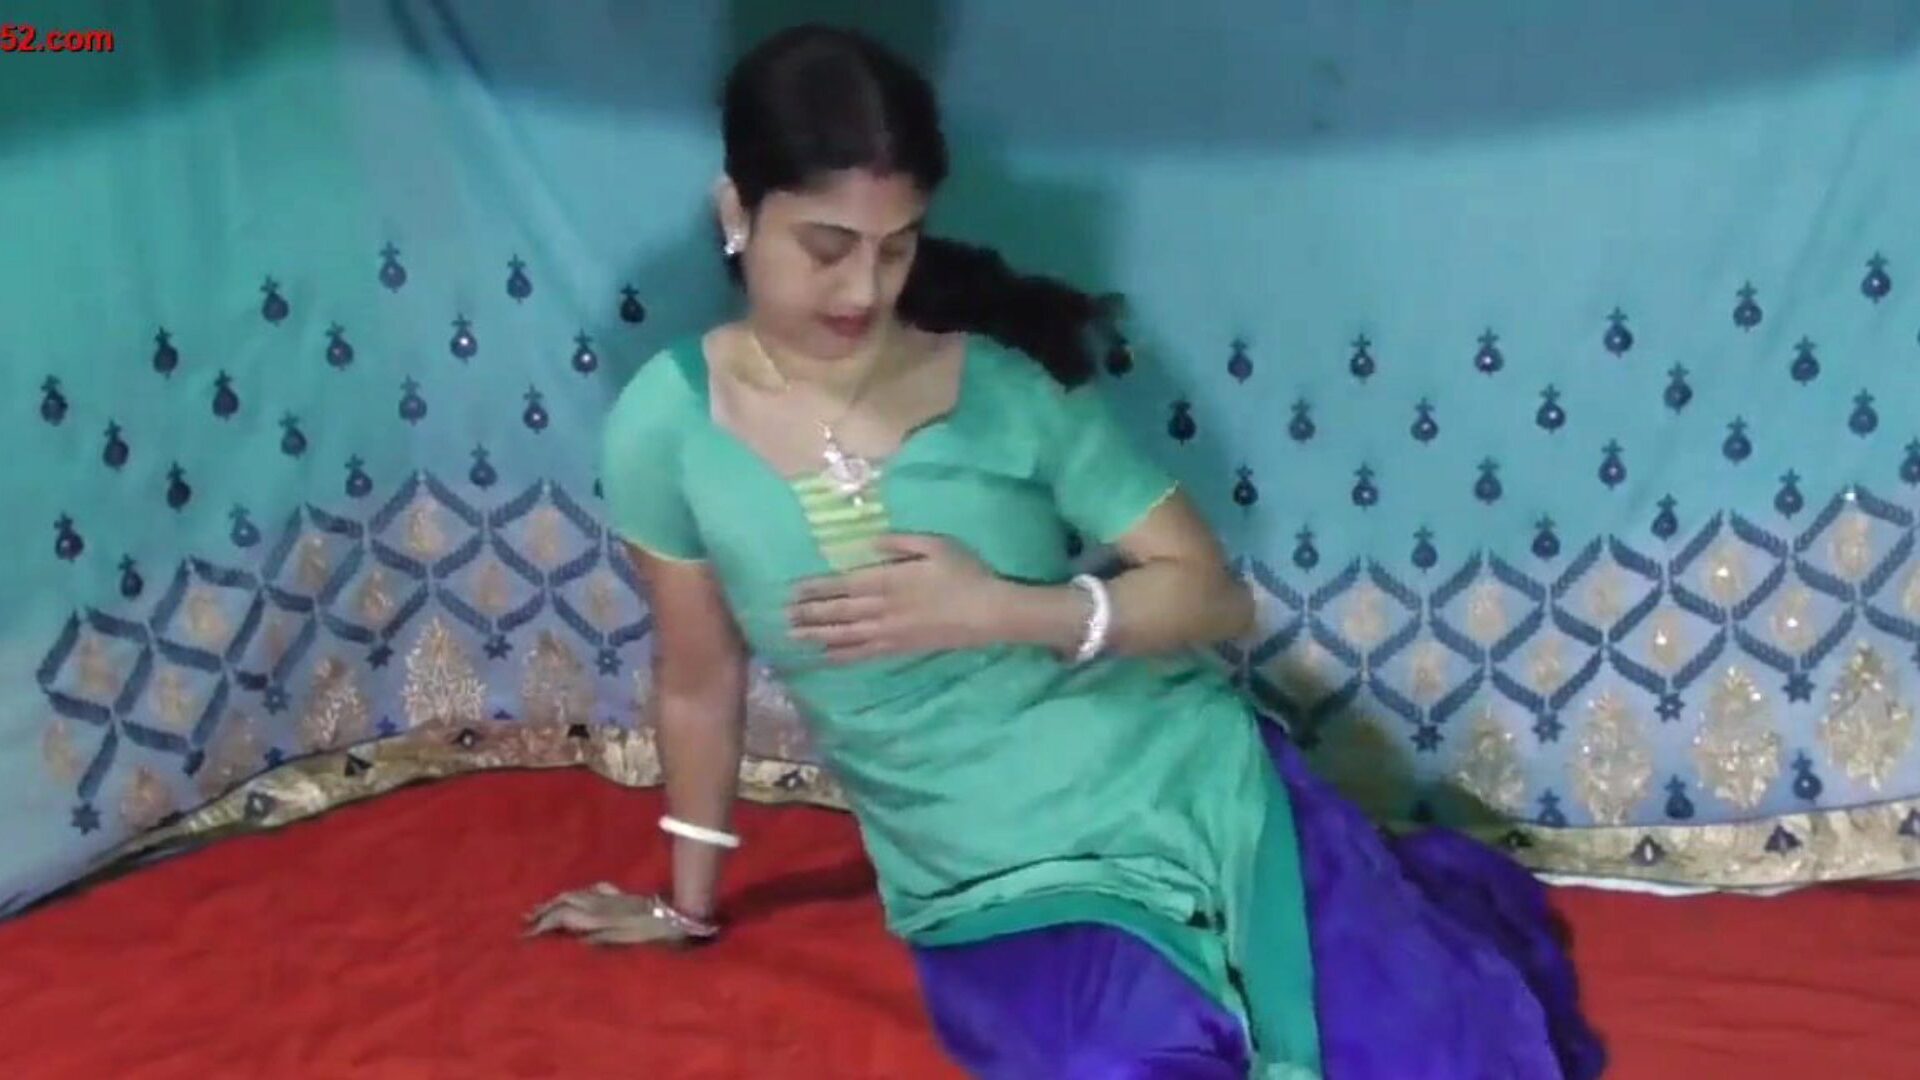 cute n sexy village indian women folladas delante de la cámara ver cute n sexy village indian women folladas delante de la cámara movie on xhamster - the ultimate bevy of free asian free n hd porno tube movies